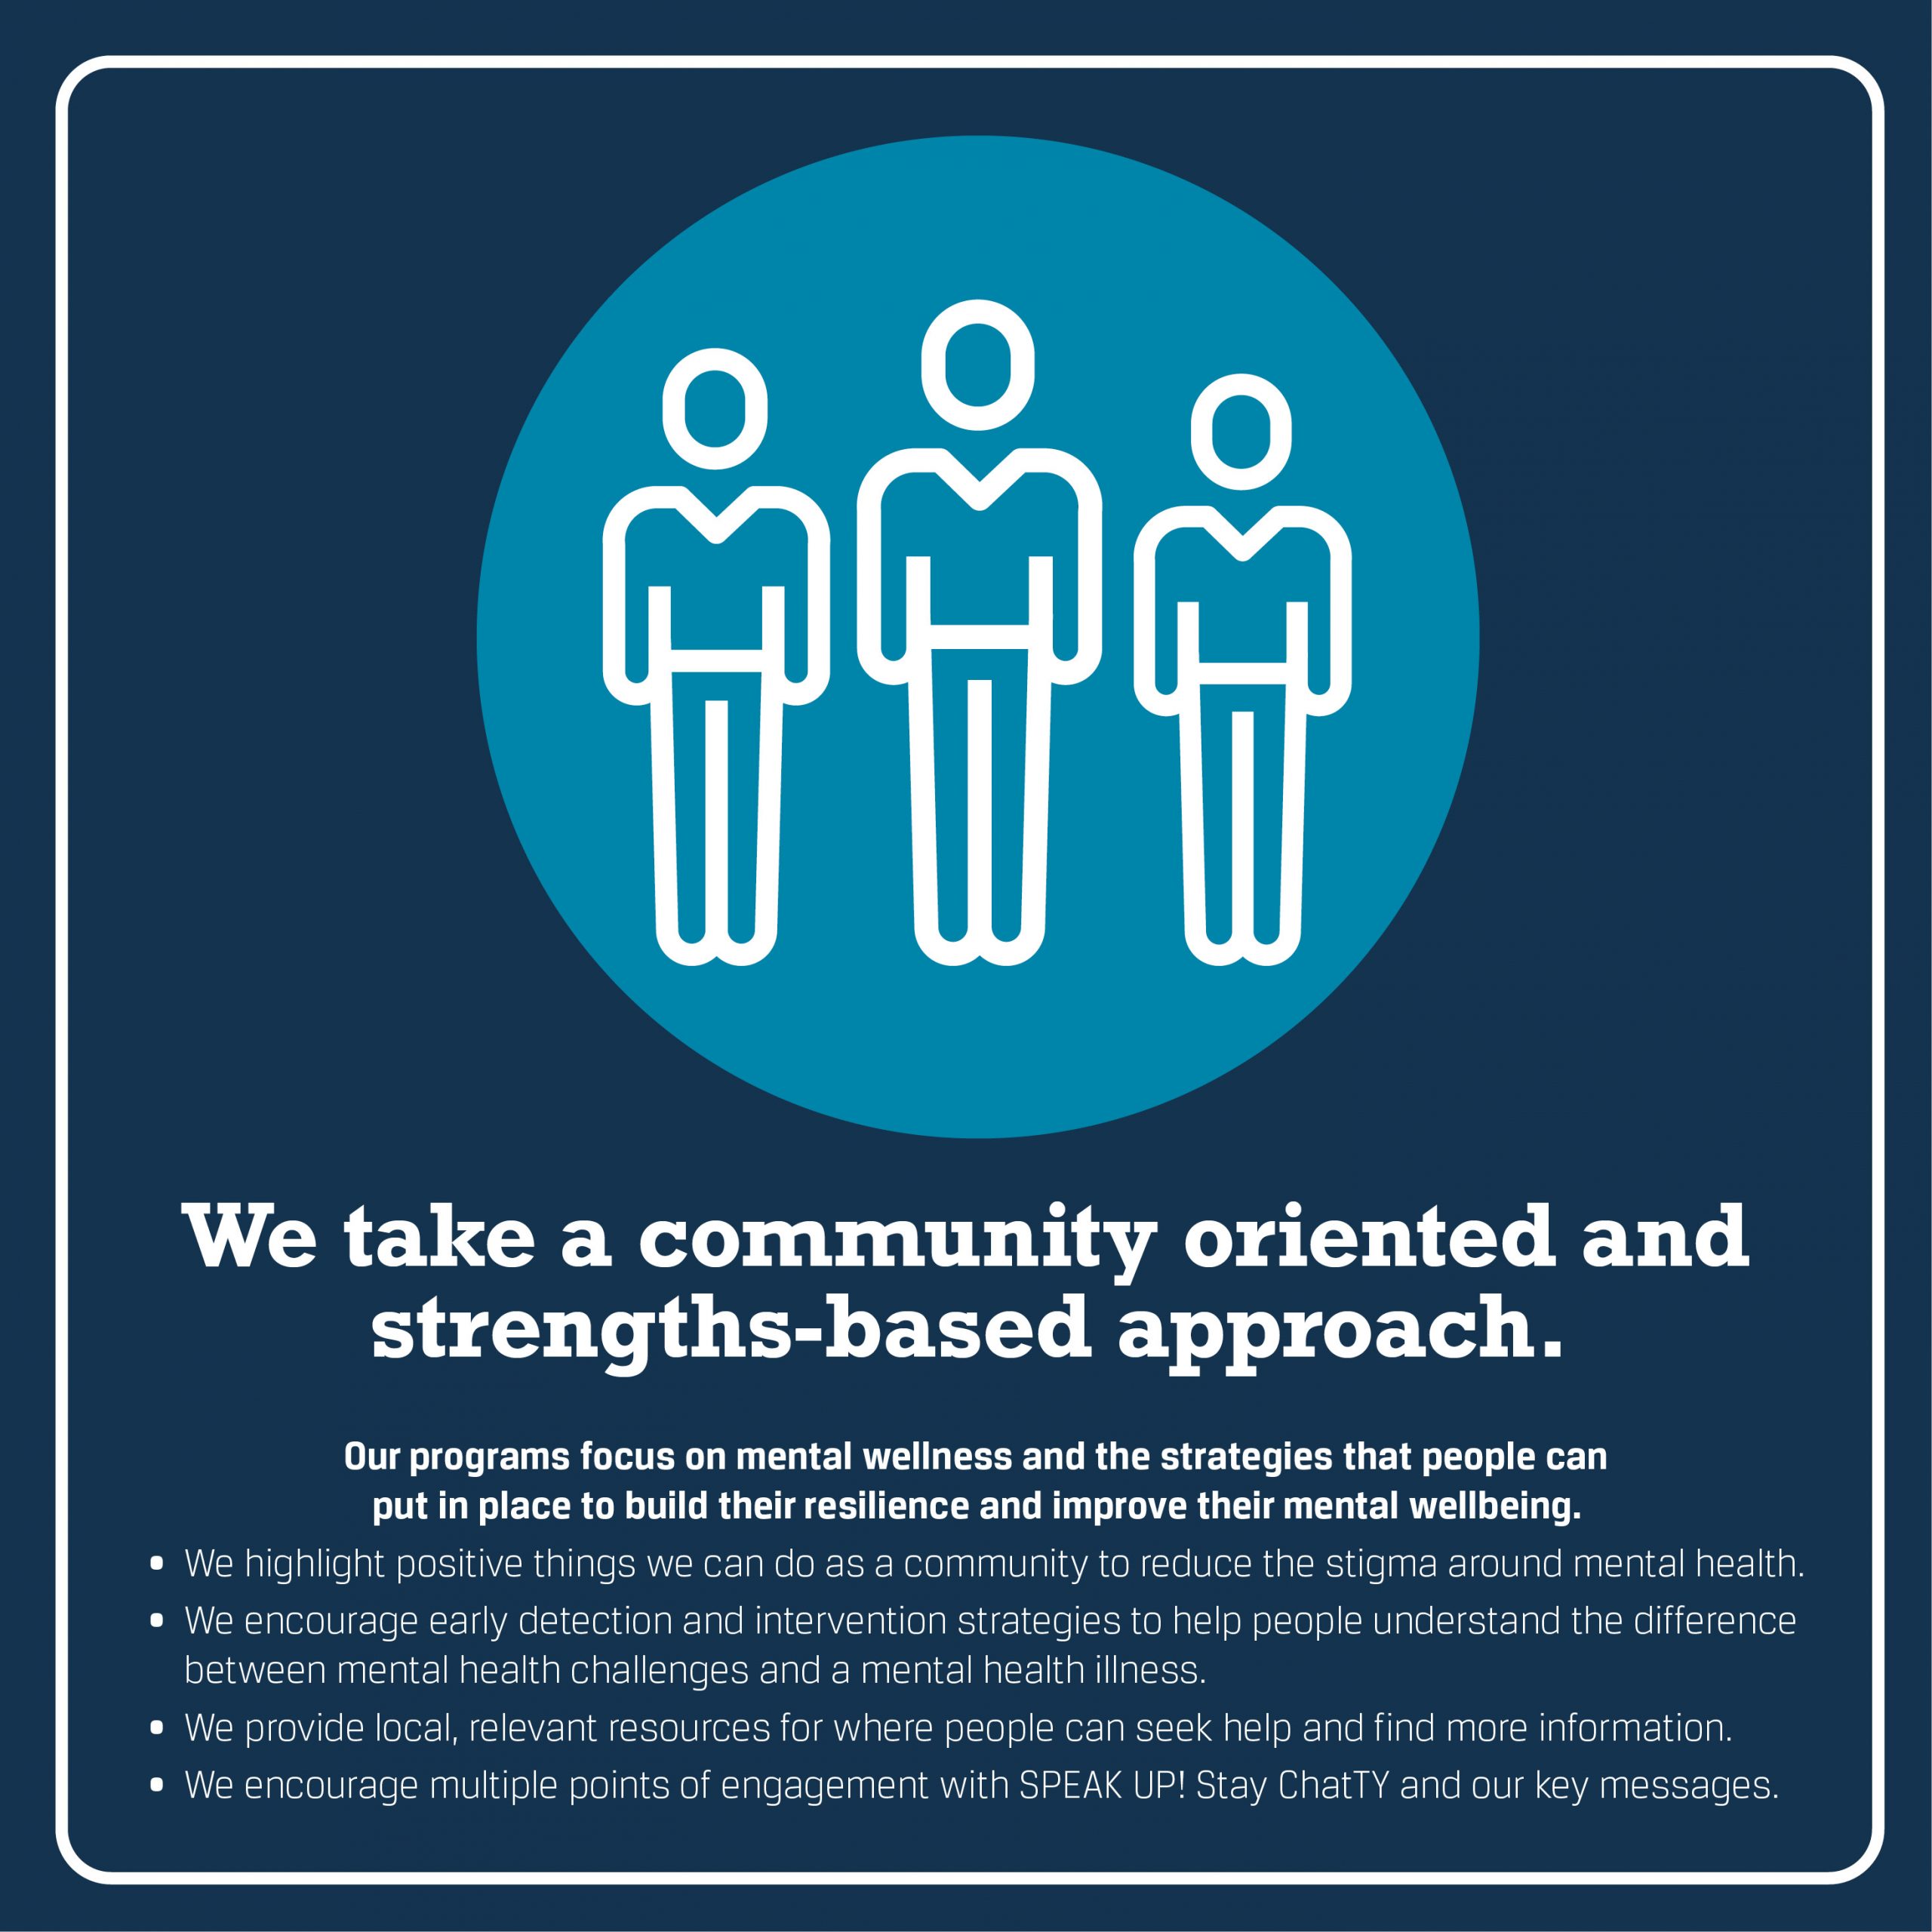 Stay ChatTY - We take a community oriented and strengths-based approach.